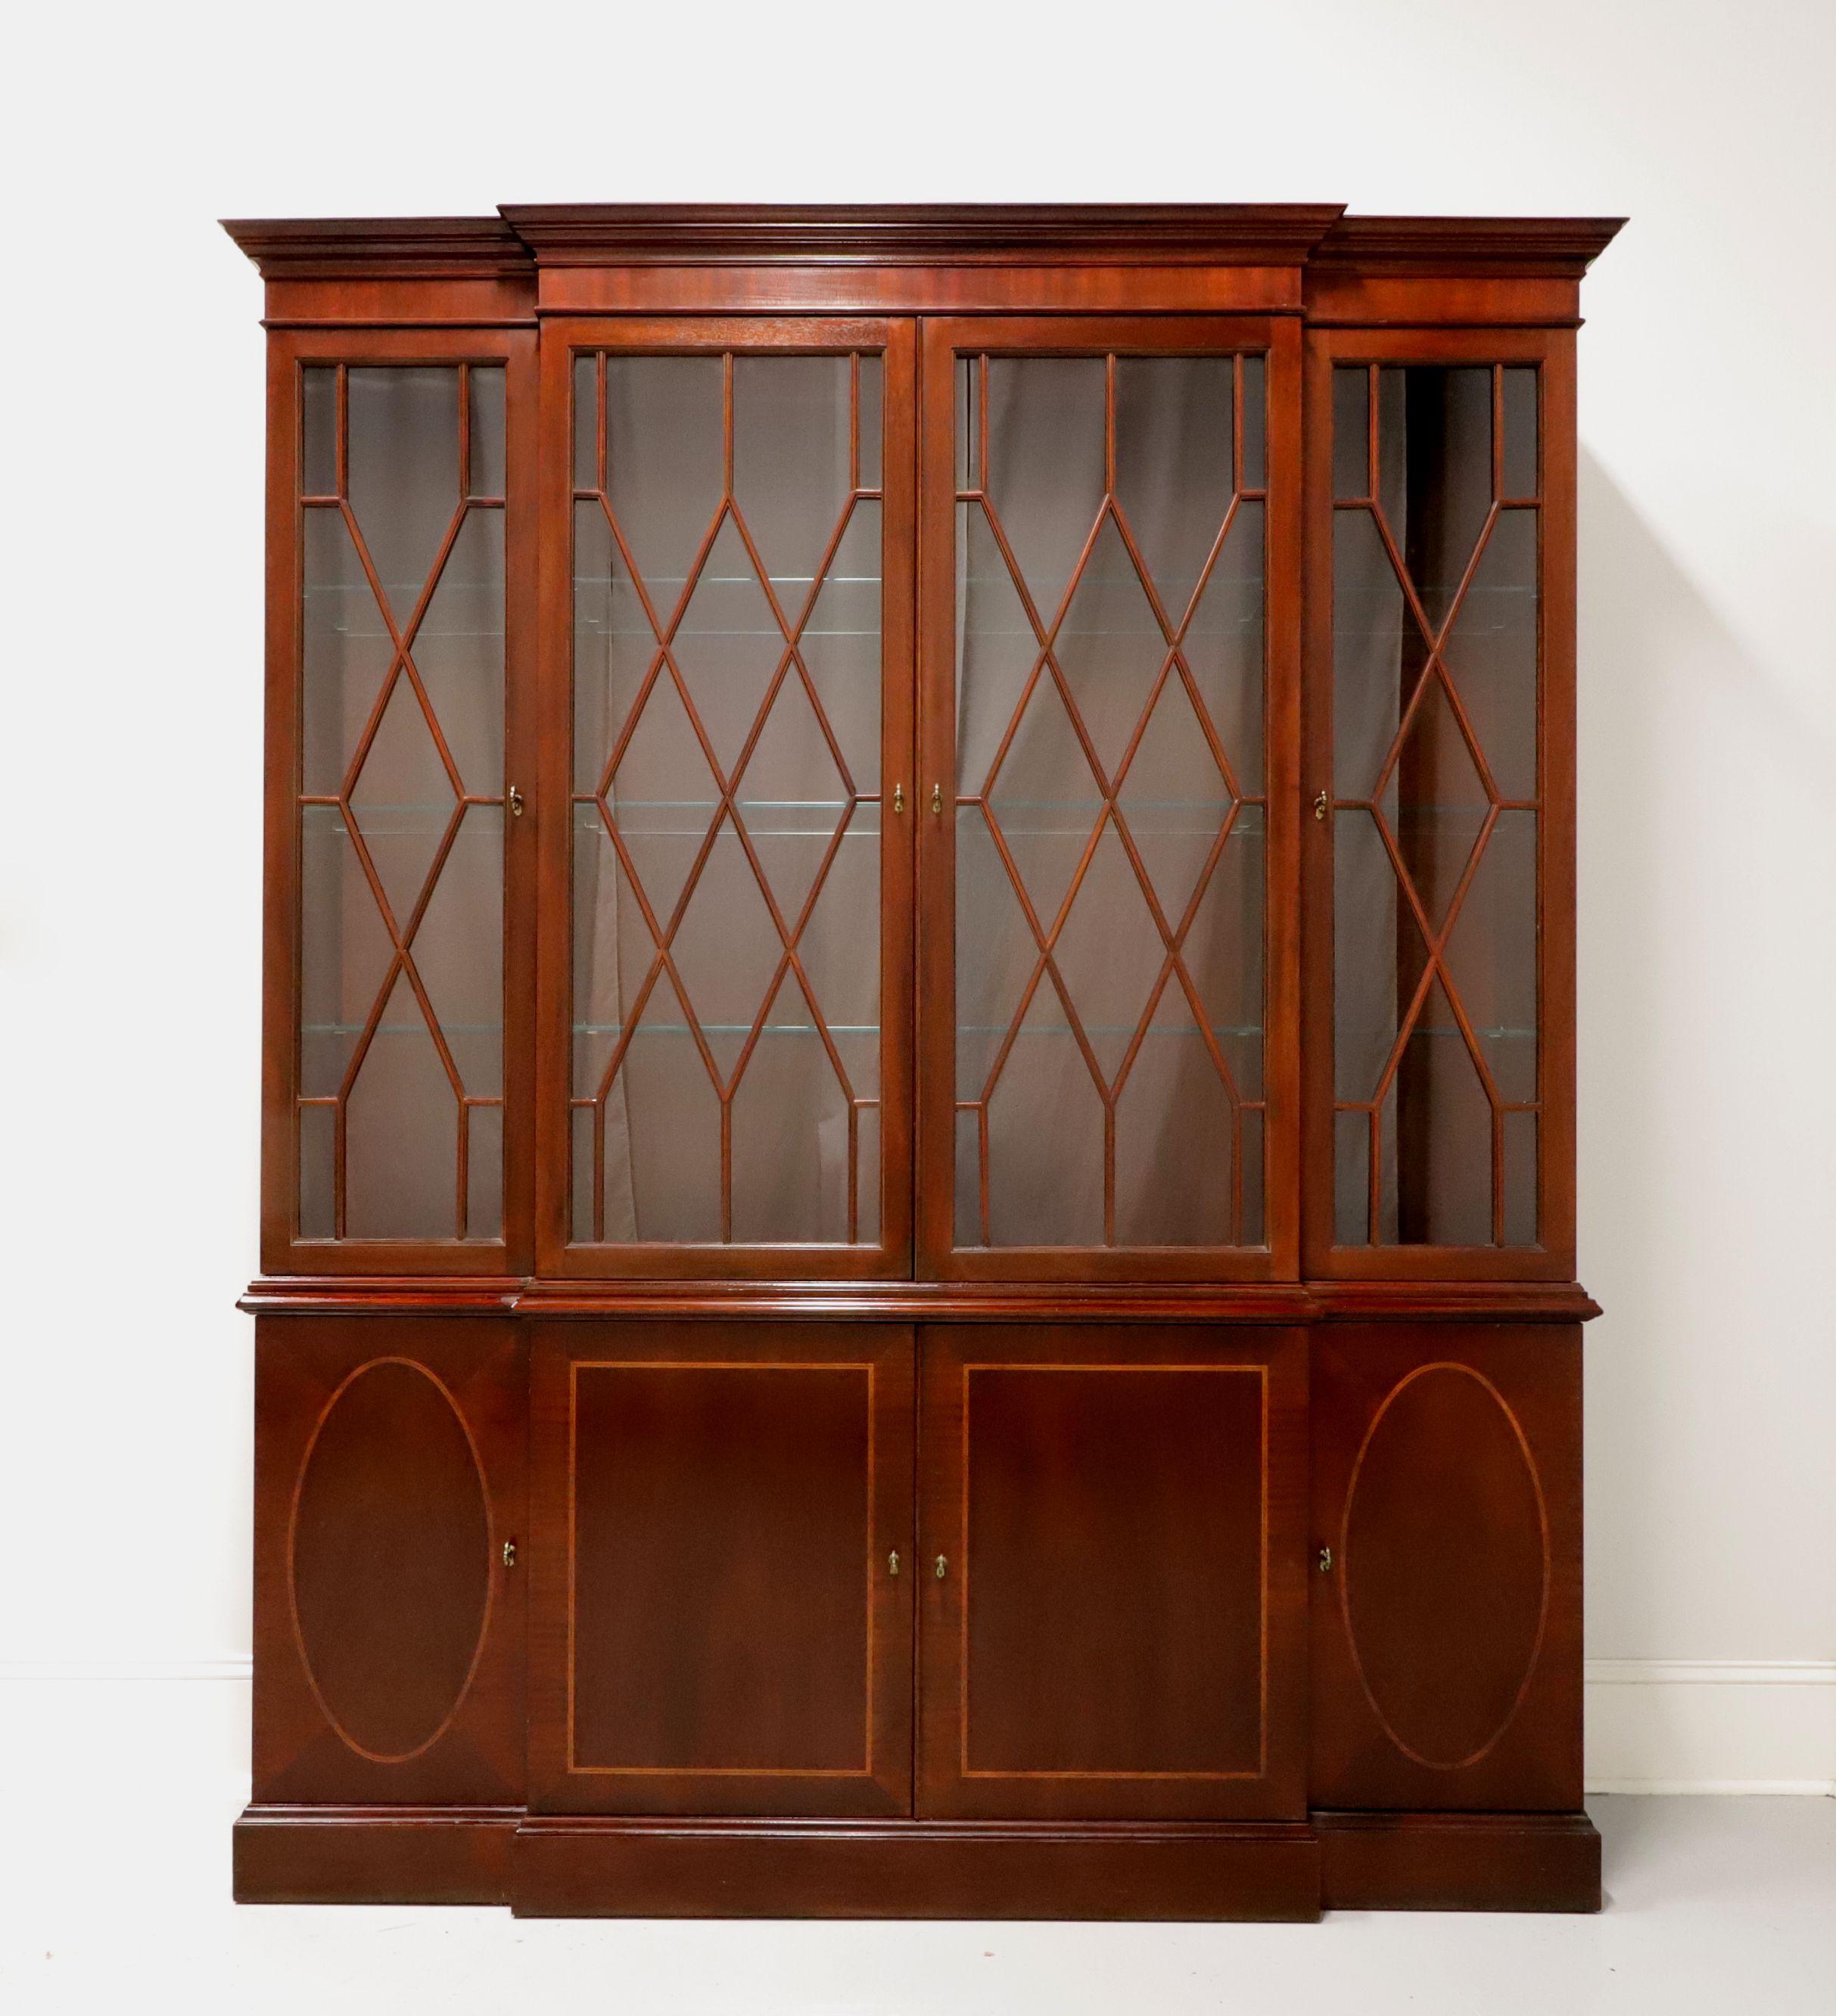 A Chippendale style breakfront china cabinet by Baker Furniture, from their Historic Charleston Collection. Inlaid mahogany with brass hardware, crown moulding to top and fretwork to glass doors. Upper lighted cabinet features three separate